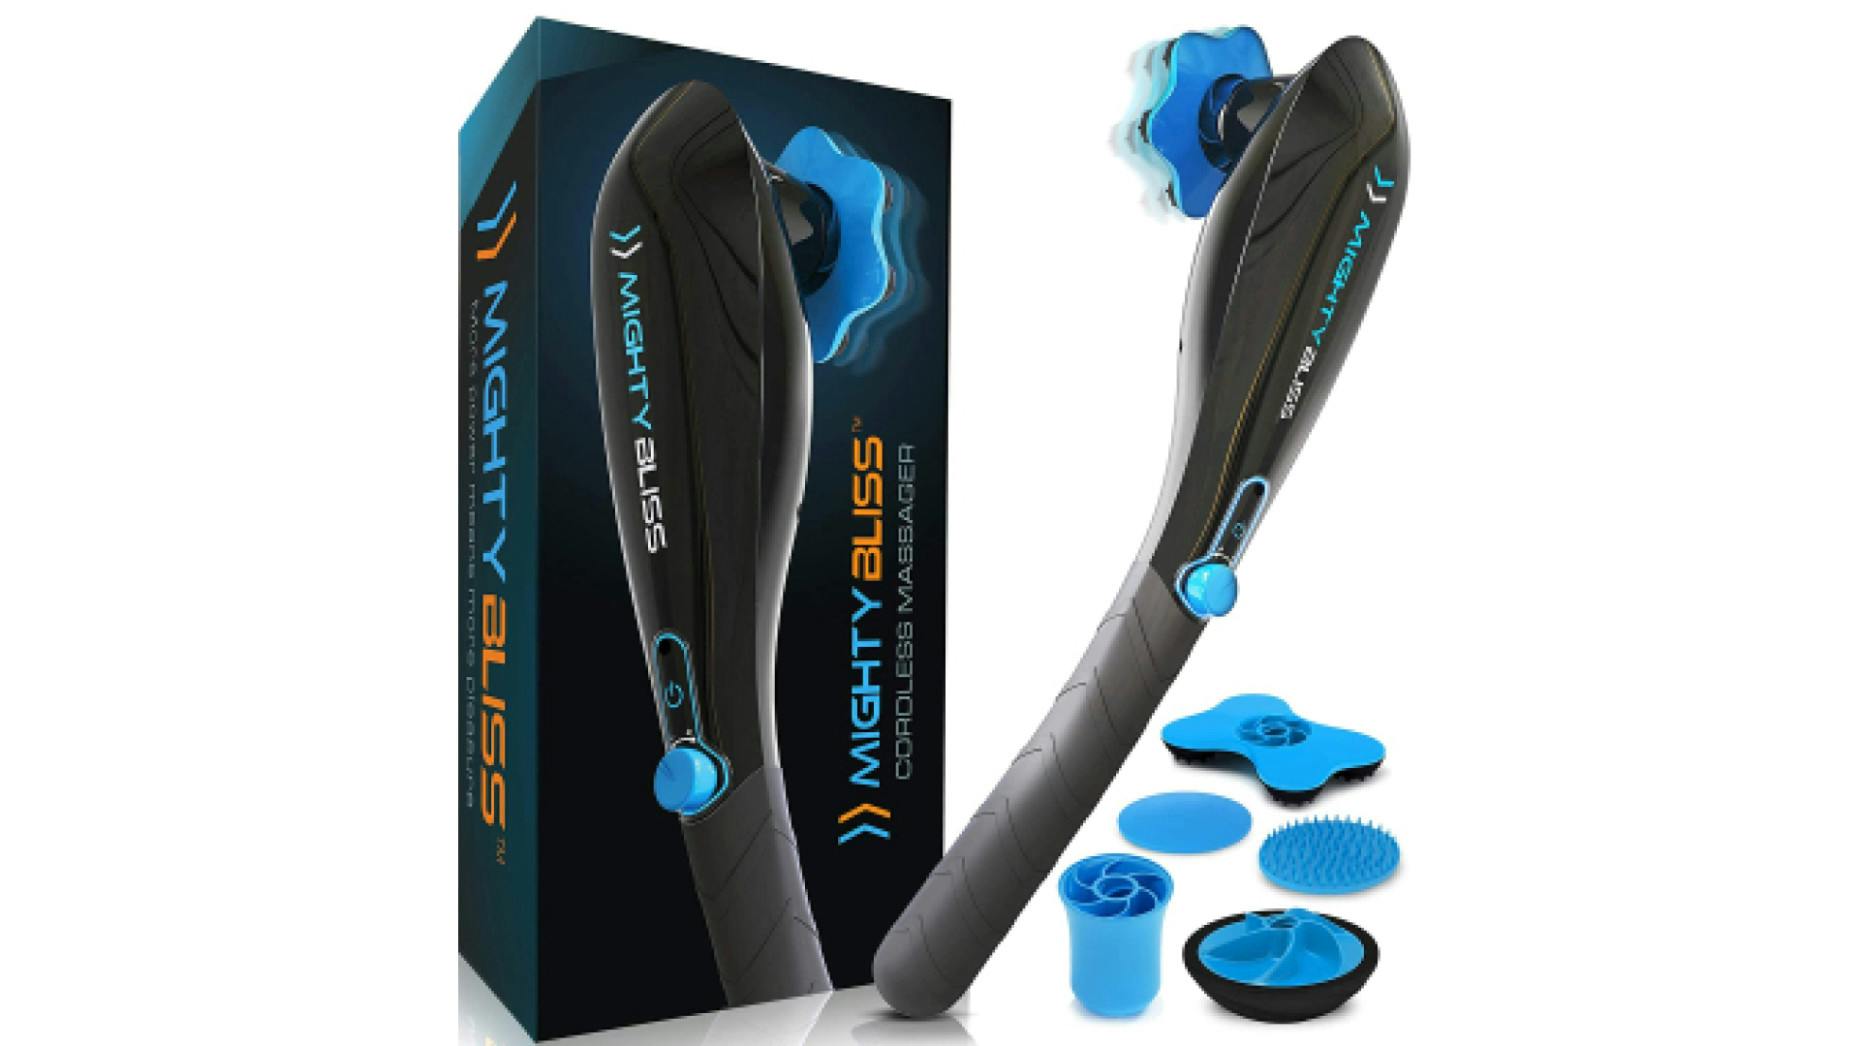 handheld muscle massager for sore muscles